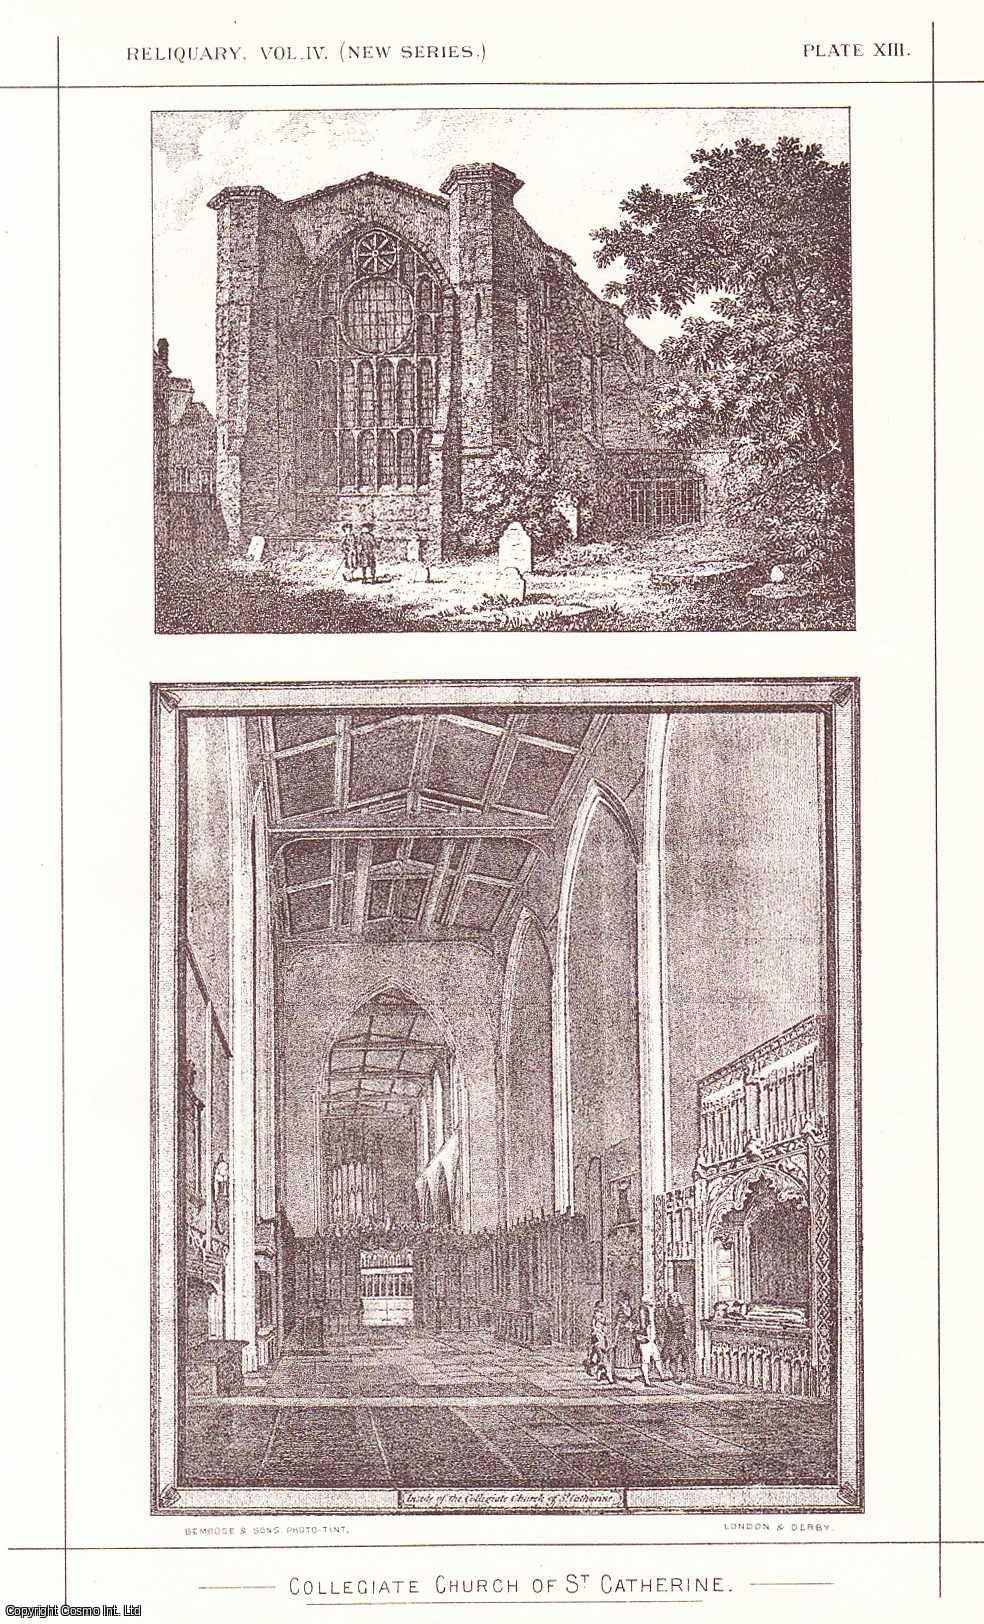 No Author Stated - The Hospital of St. Katherine, near the Tower of London, 1546. An original article from the Reliquary, Quarterly Journal & Review, 1890.